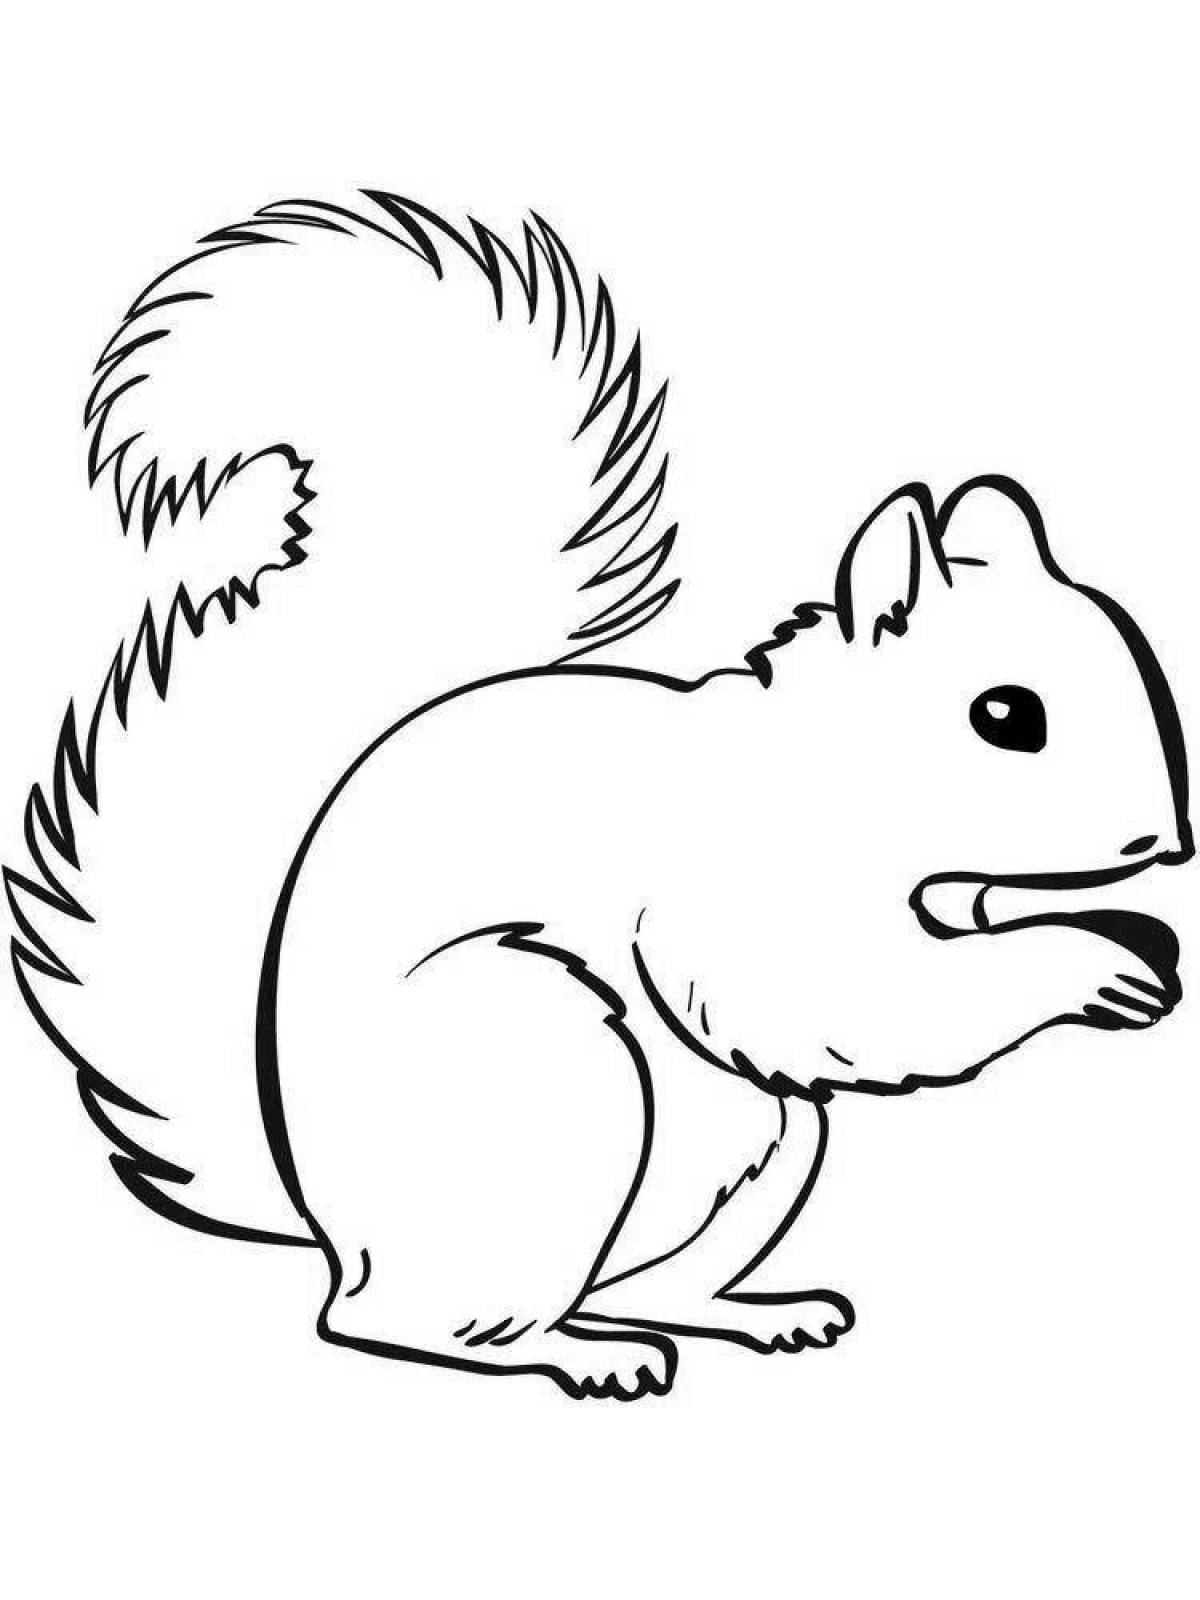 Fluffy squirrel coloring book